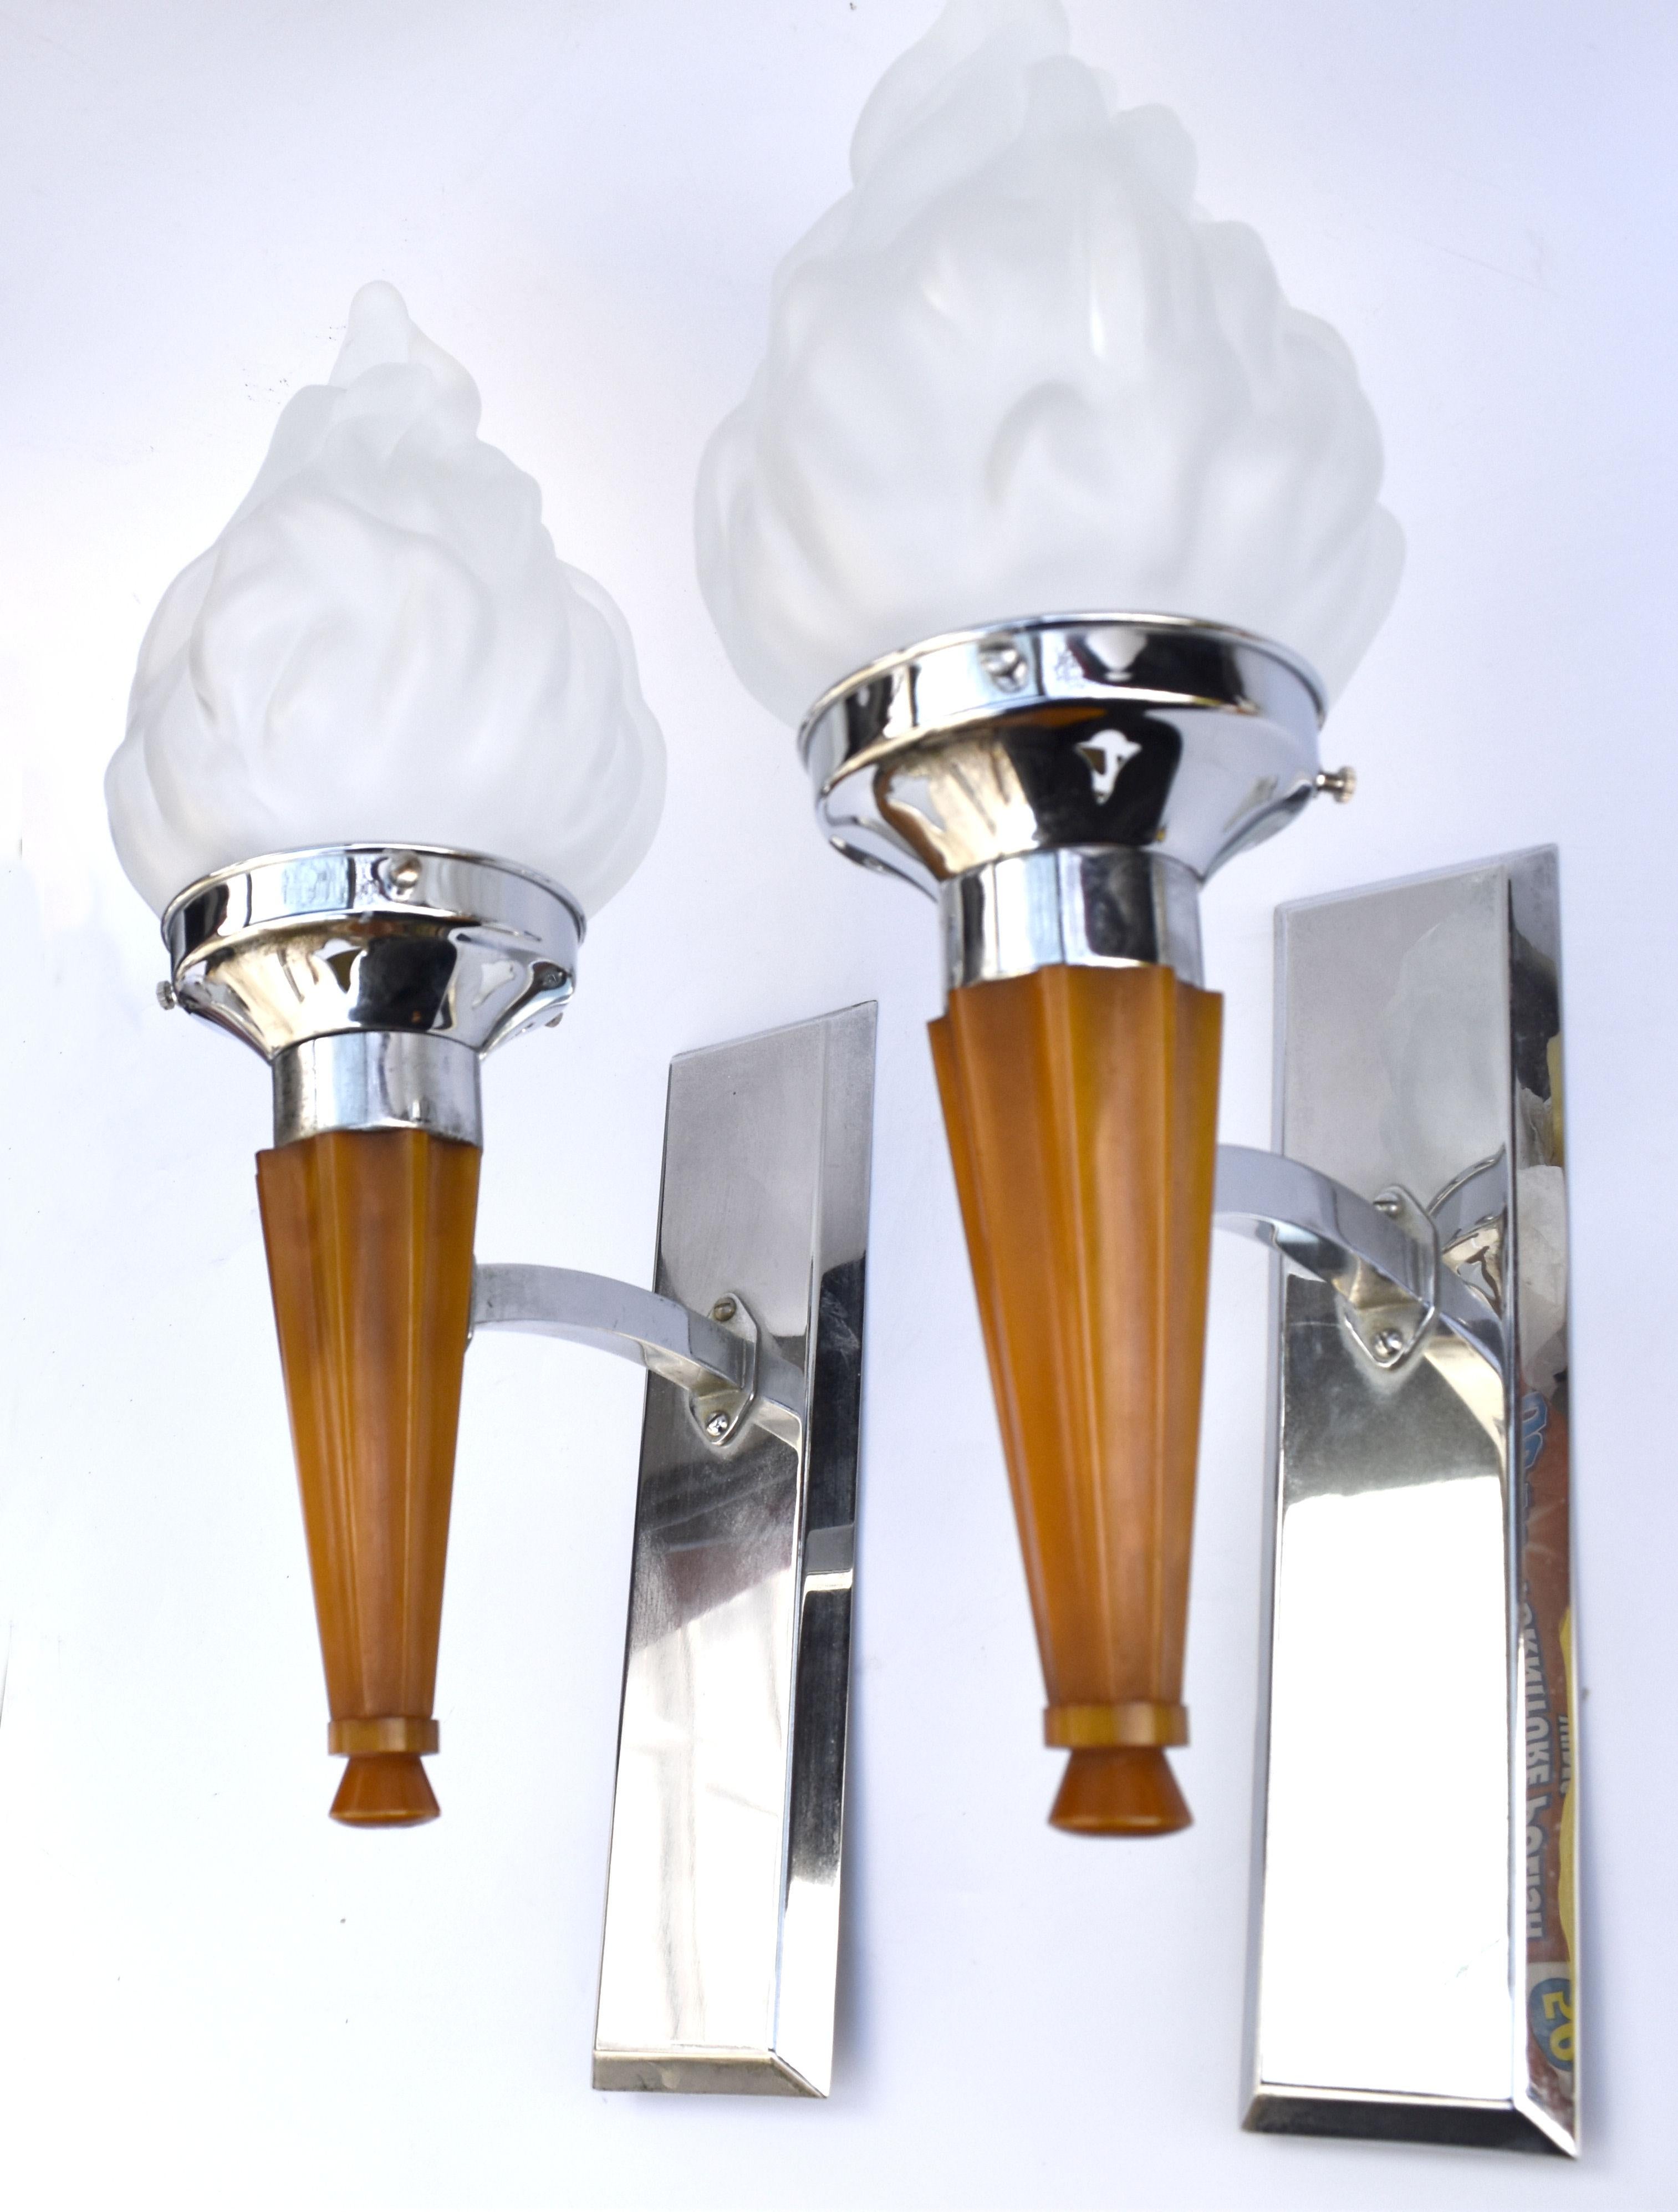 Art Deco Pair of Matching Flame Wall Light Sconces, Circa 1930's For Sale 2